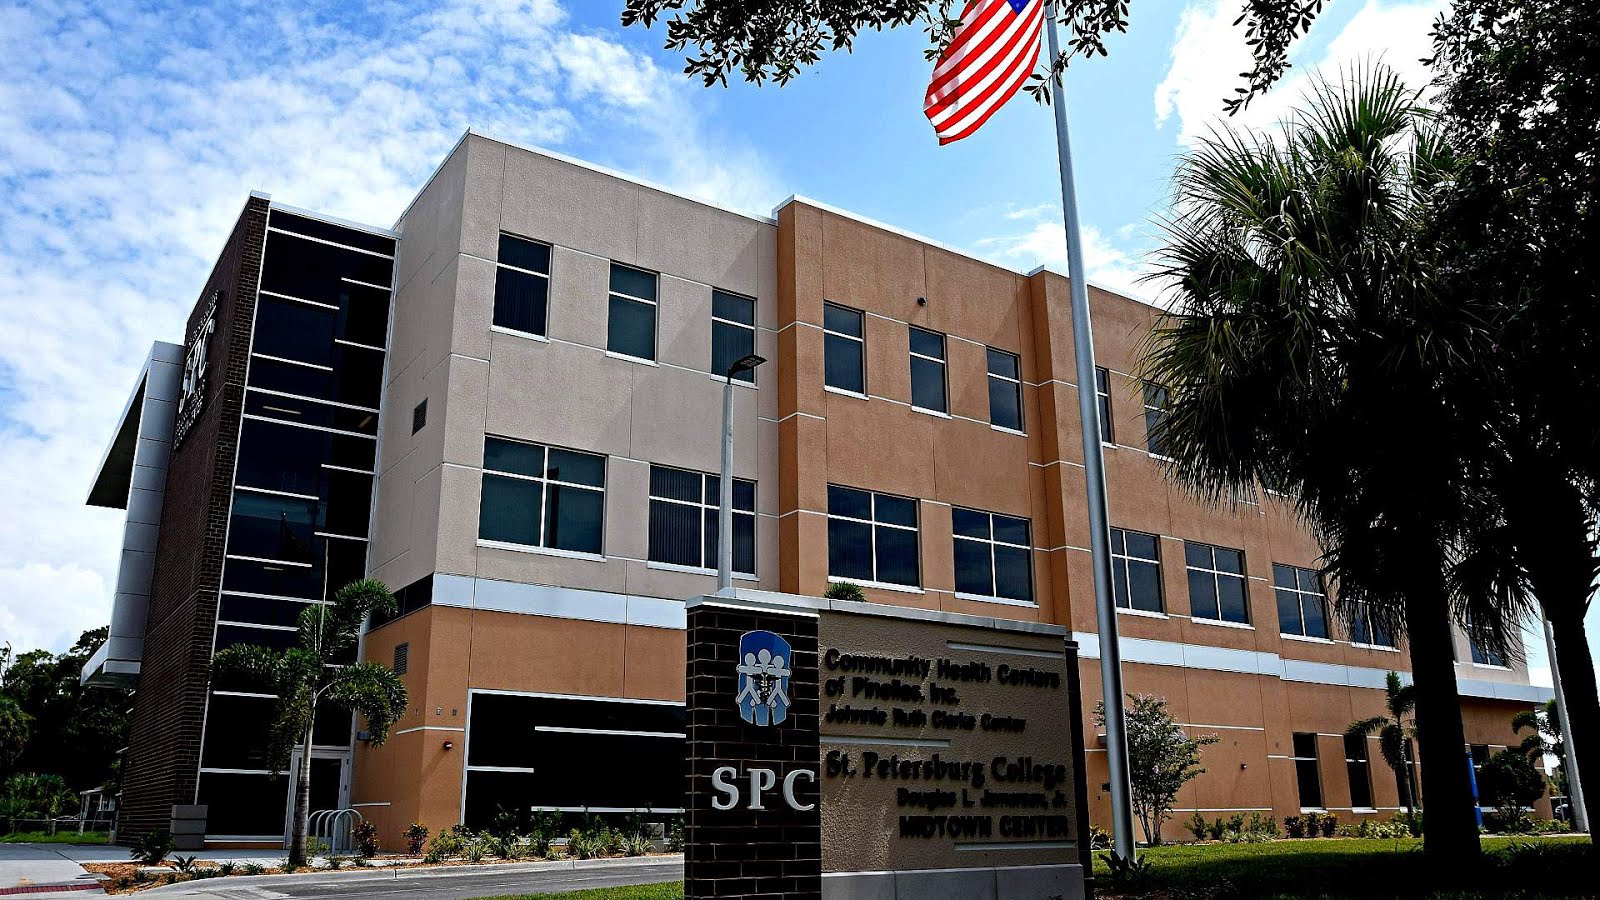 community-colleges-in-st-petersburg-fl-college-choices